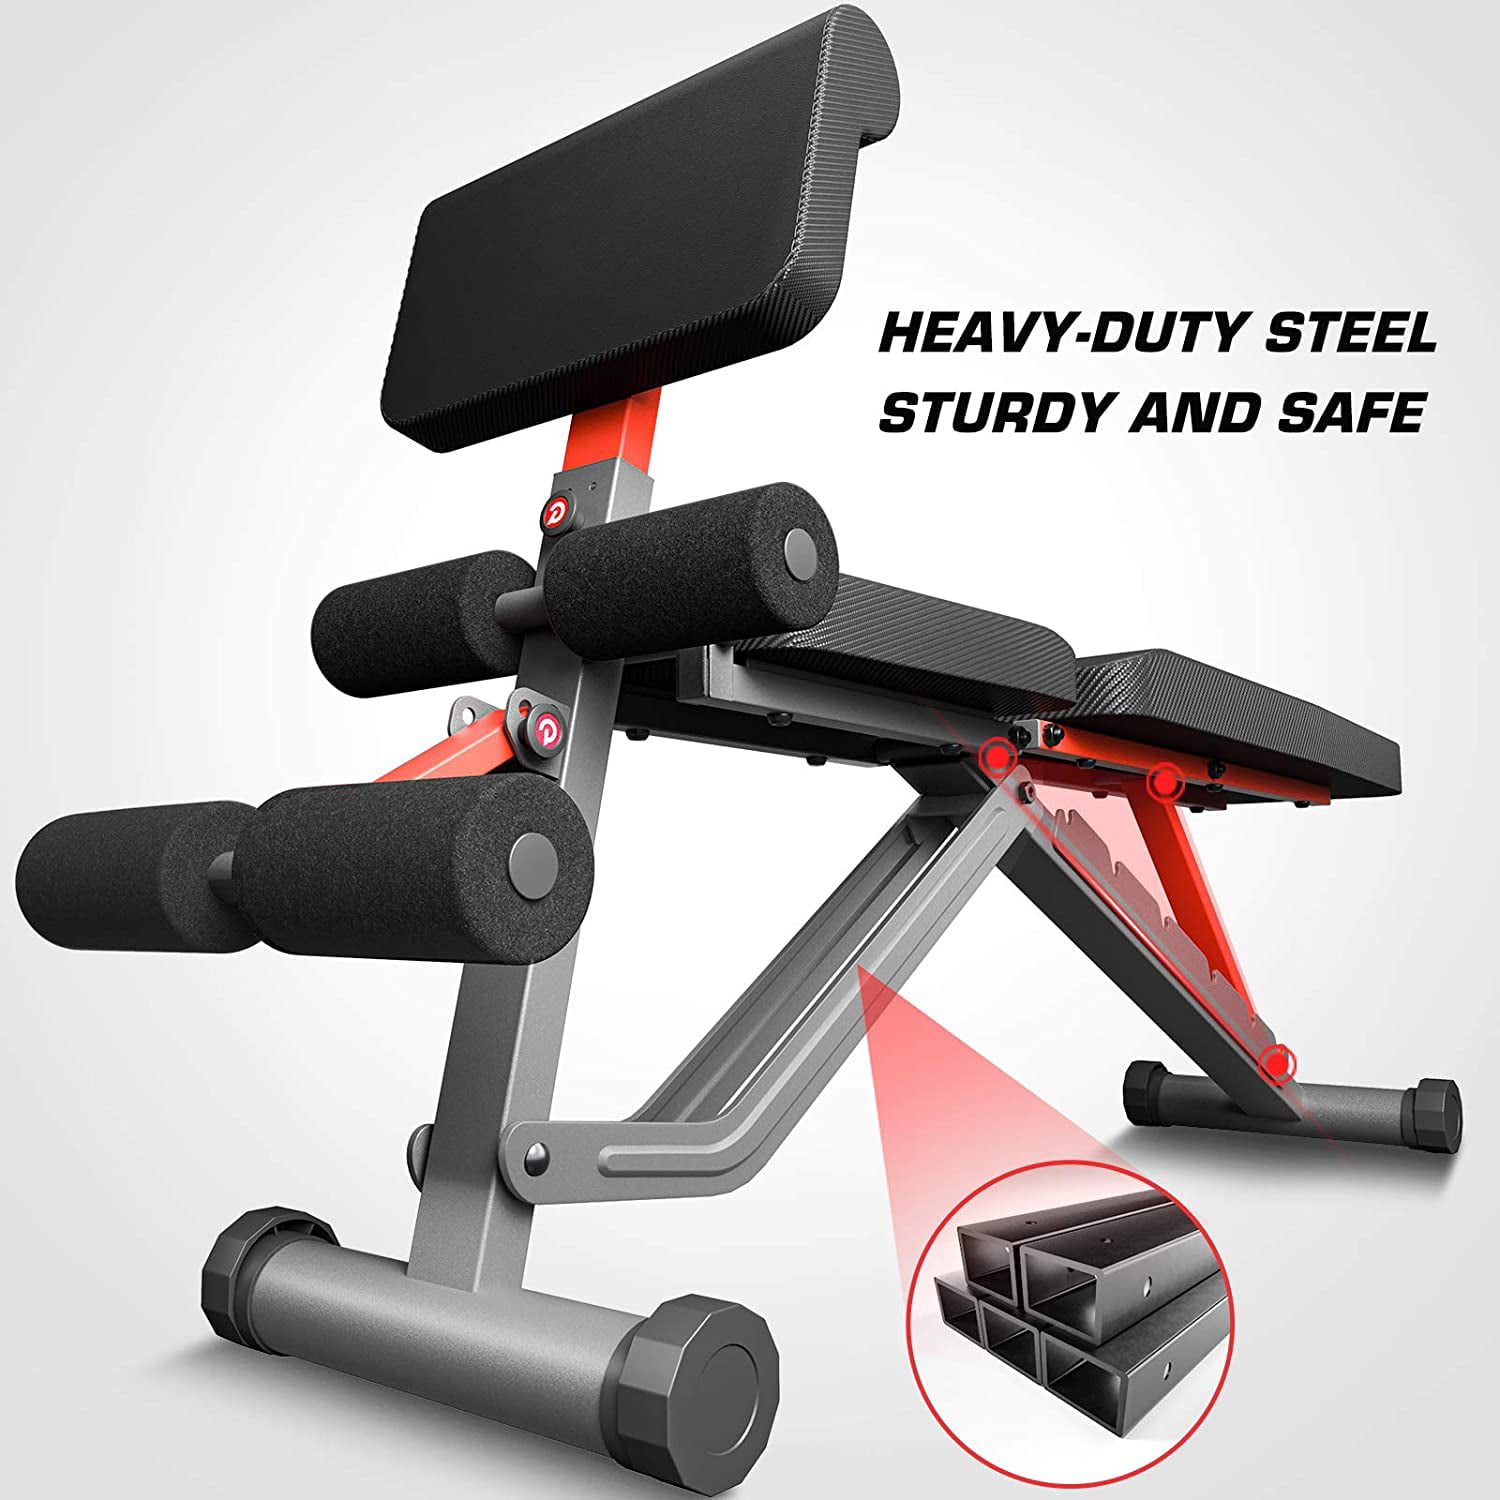 Strength Training Bench Press in Home Gym Decline Incline Adjustable Utility Weight Bench with Fast Folding pelpo Weight Bench for Full Body Workout